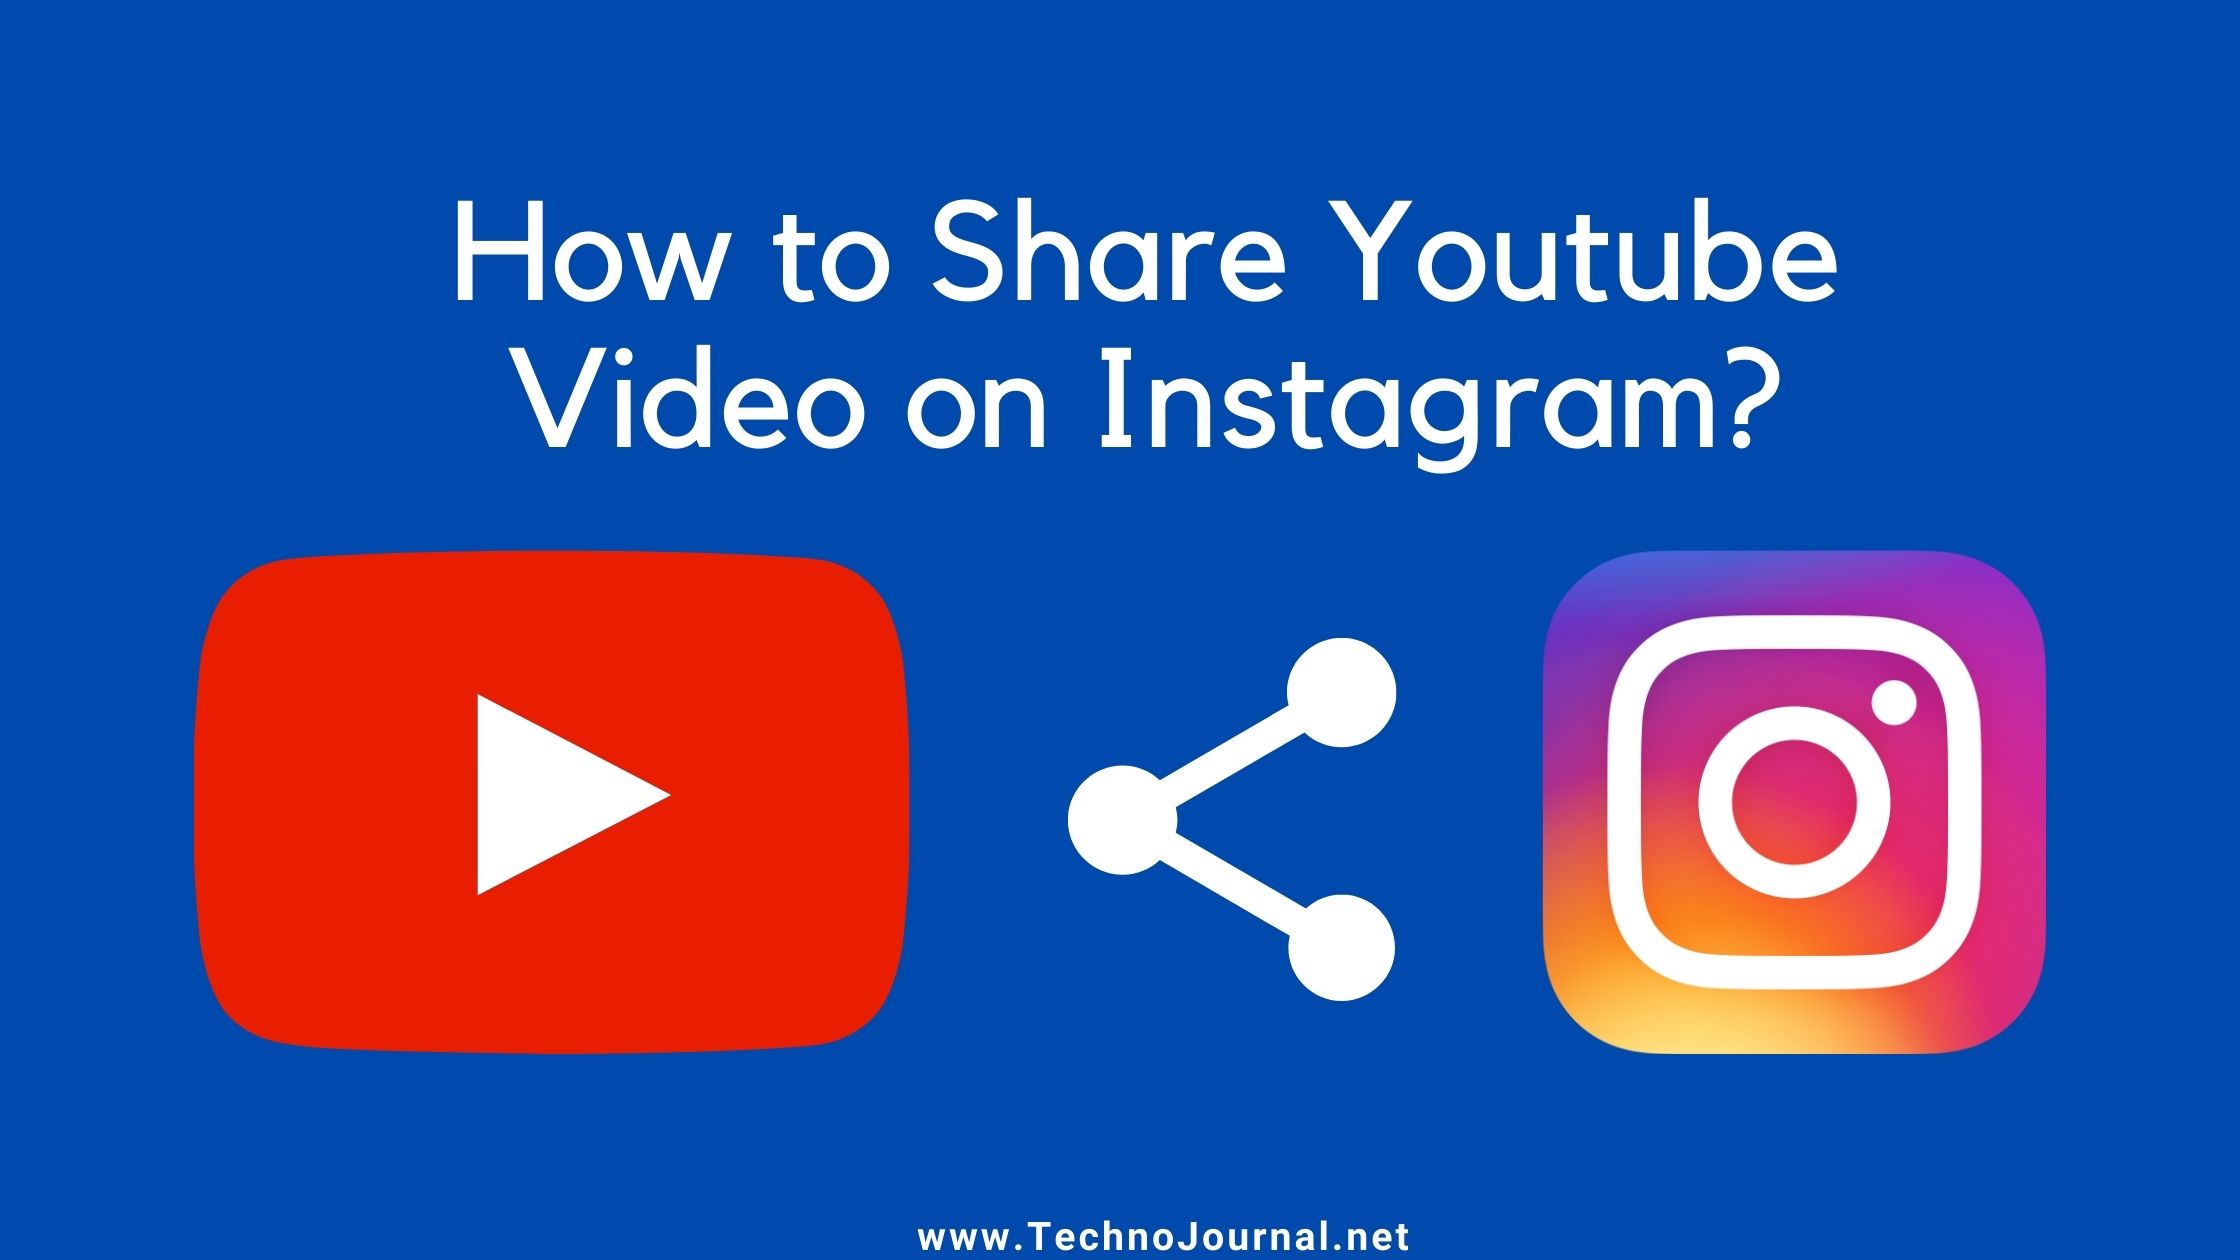 How to Share Youtube Video on Instagram